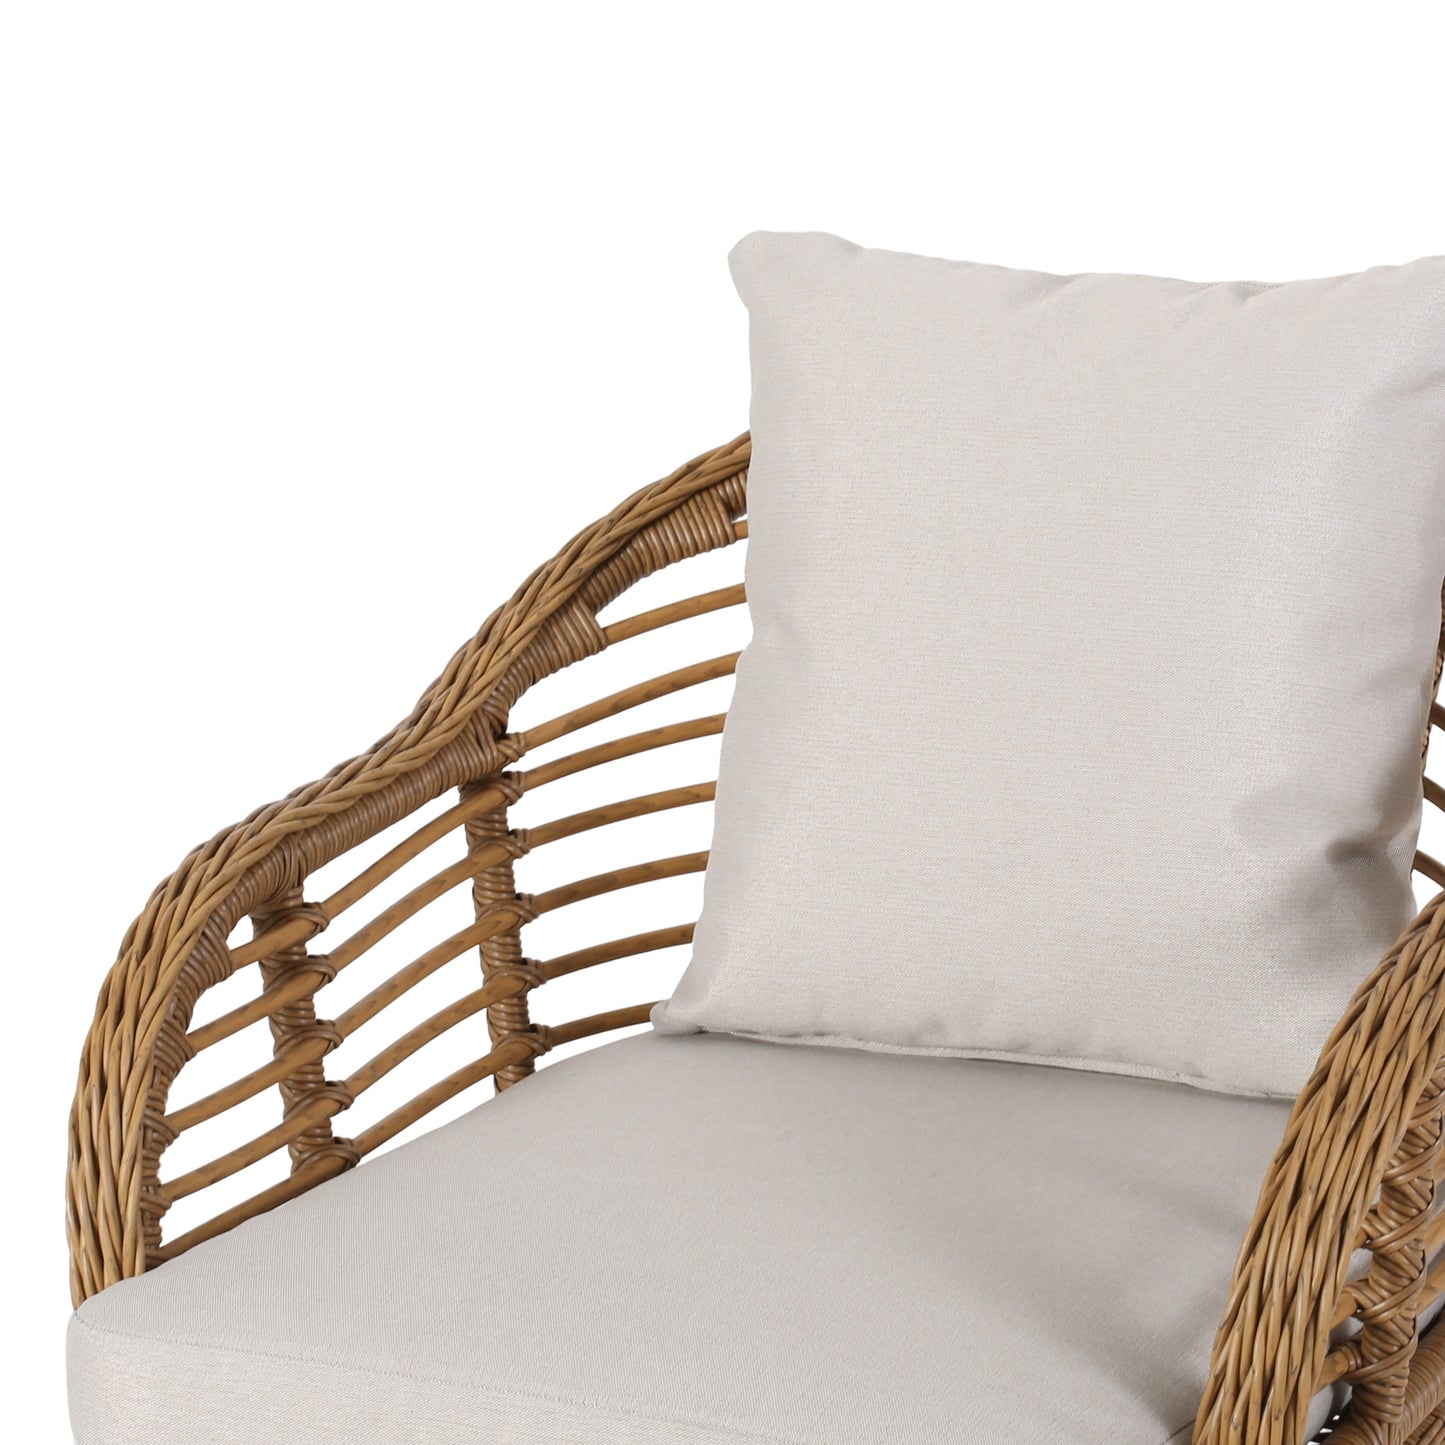 Evvy Outdoor Modern Boho 2 Seater Wicker Chat Set with Side Table